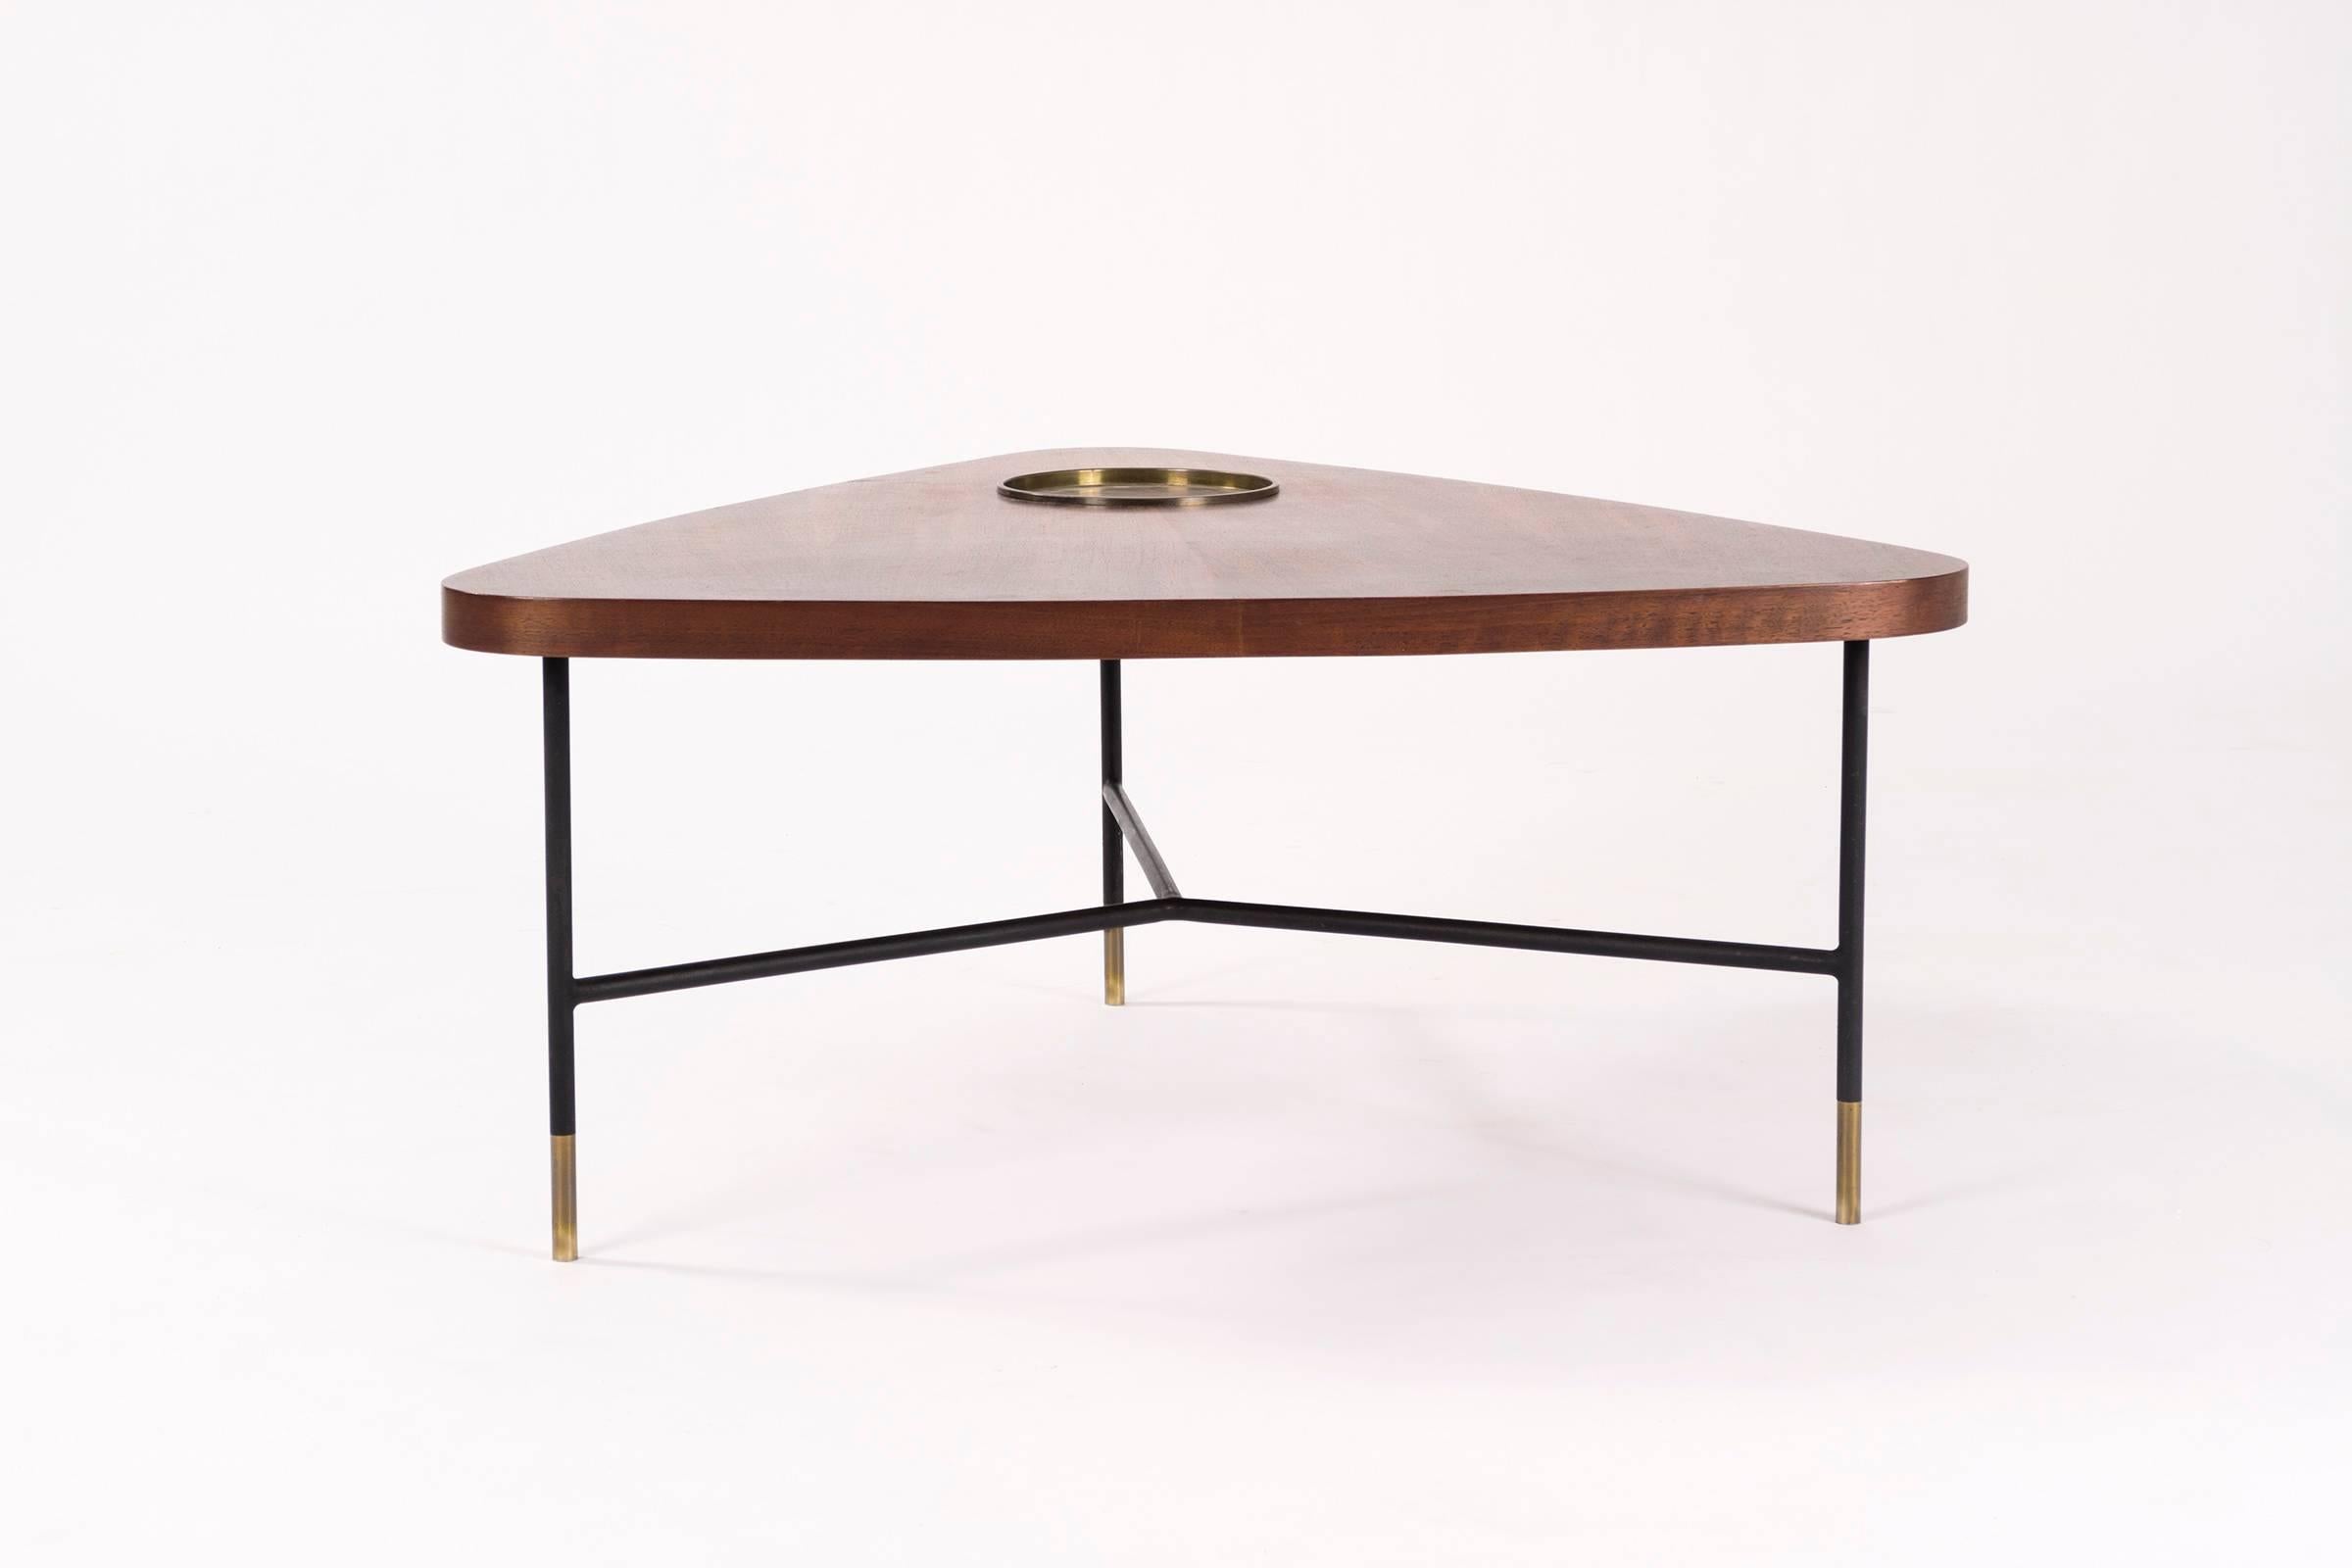 Solid walnut top with excellent accents of fiddleback. Circular bronze tray inlaid to the wood. Black painted solid steel base with brass feet.